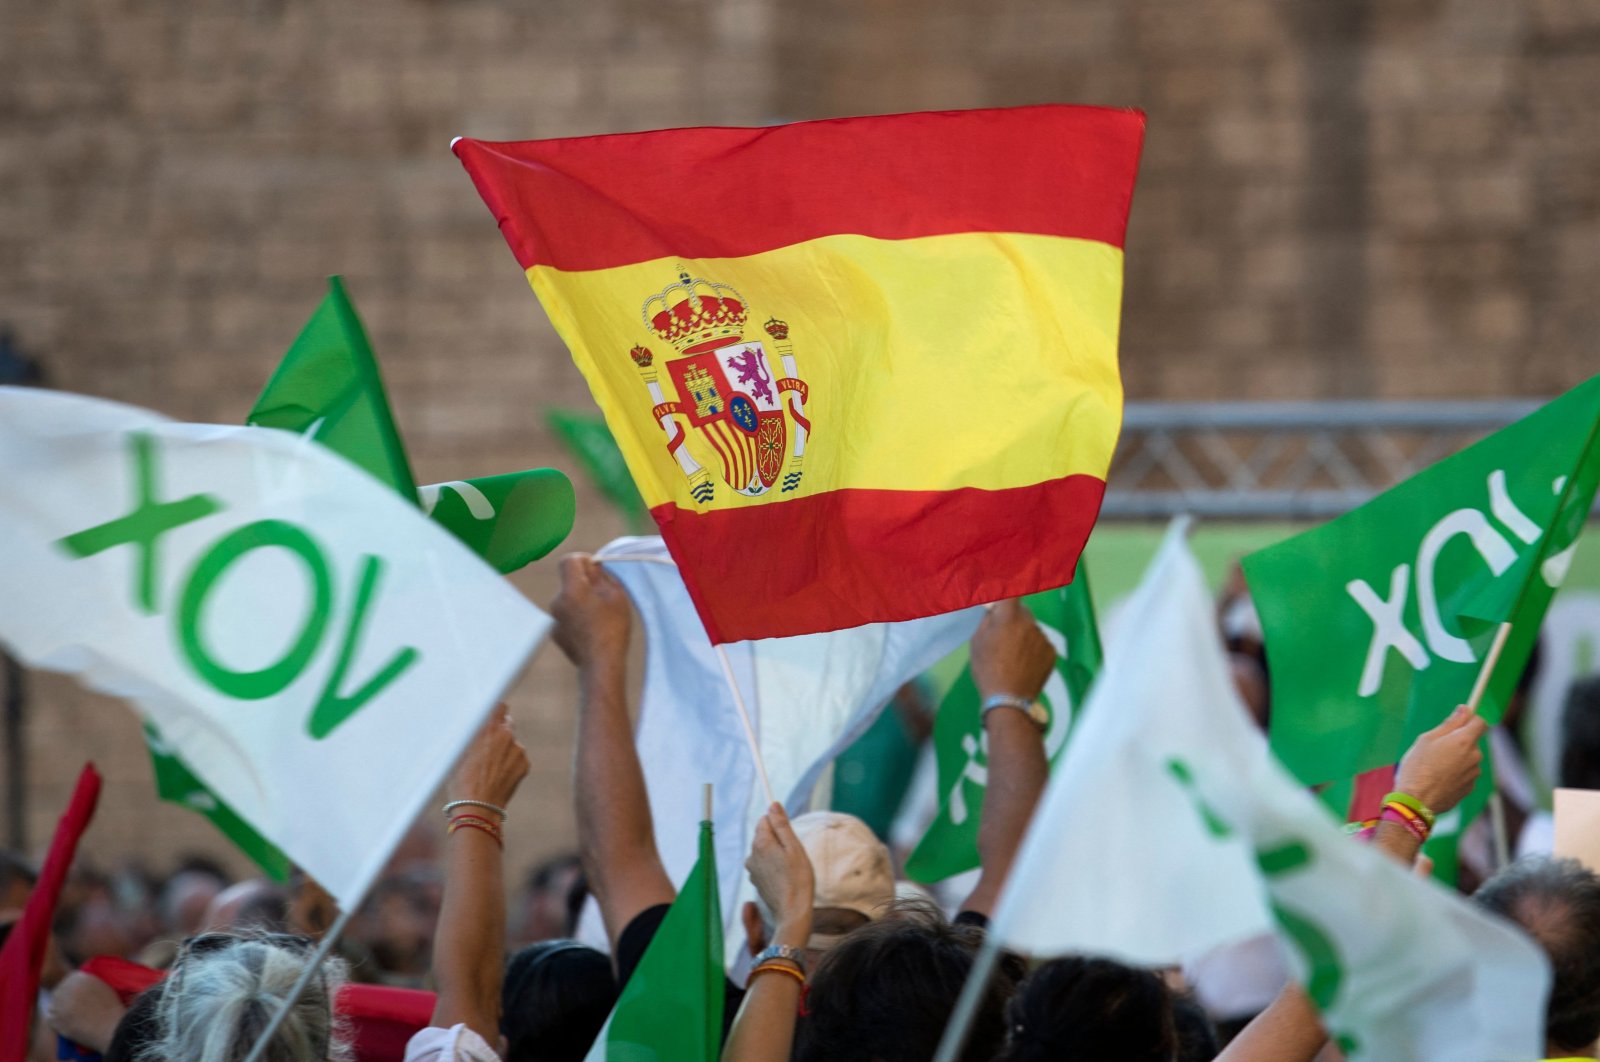 Europe’s far-right eyes new ground with likely gains in Spain polls